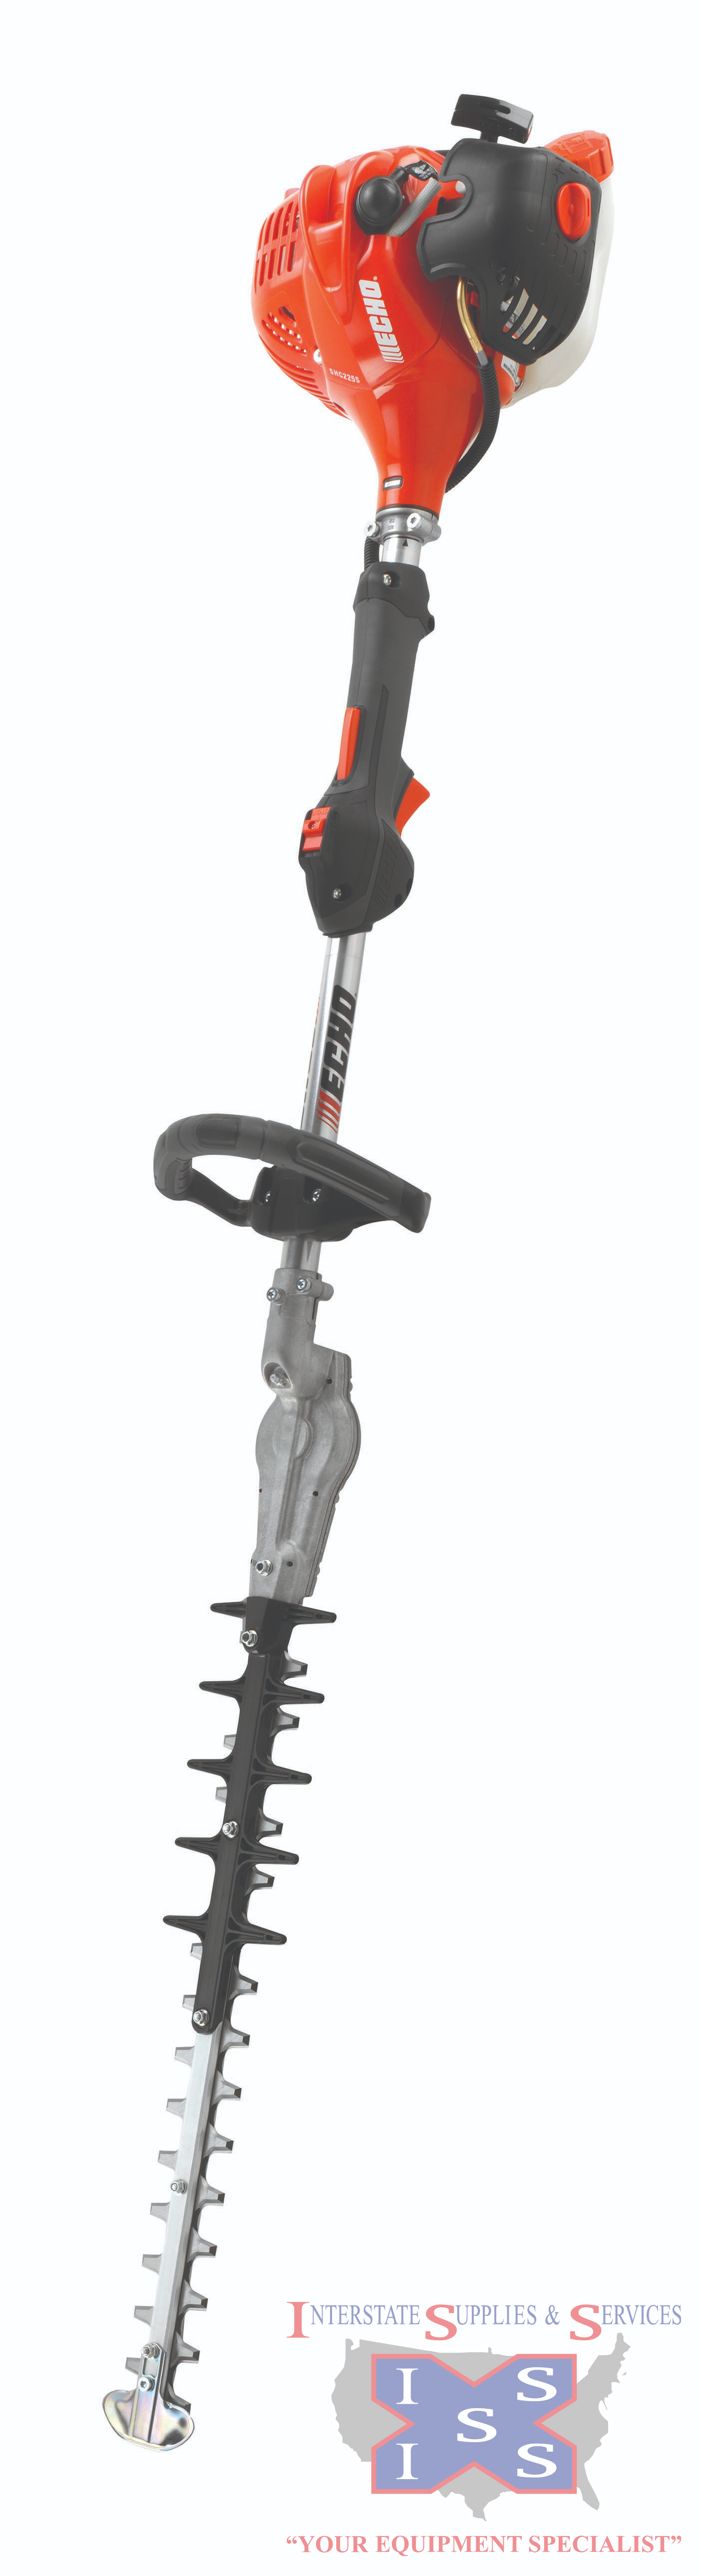 Echo SHC-225S Shafted Hedge Trimmer